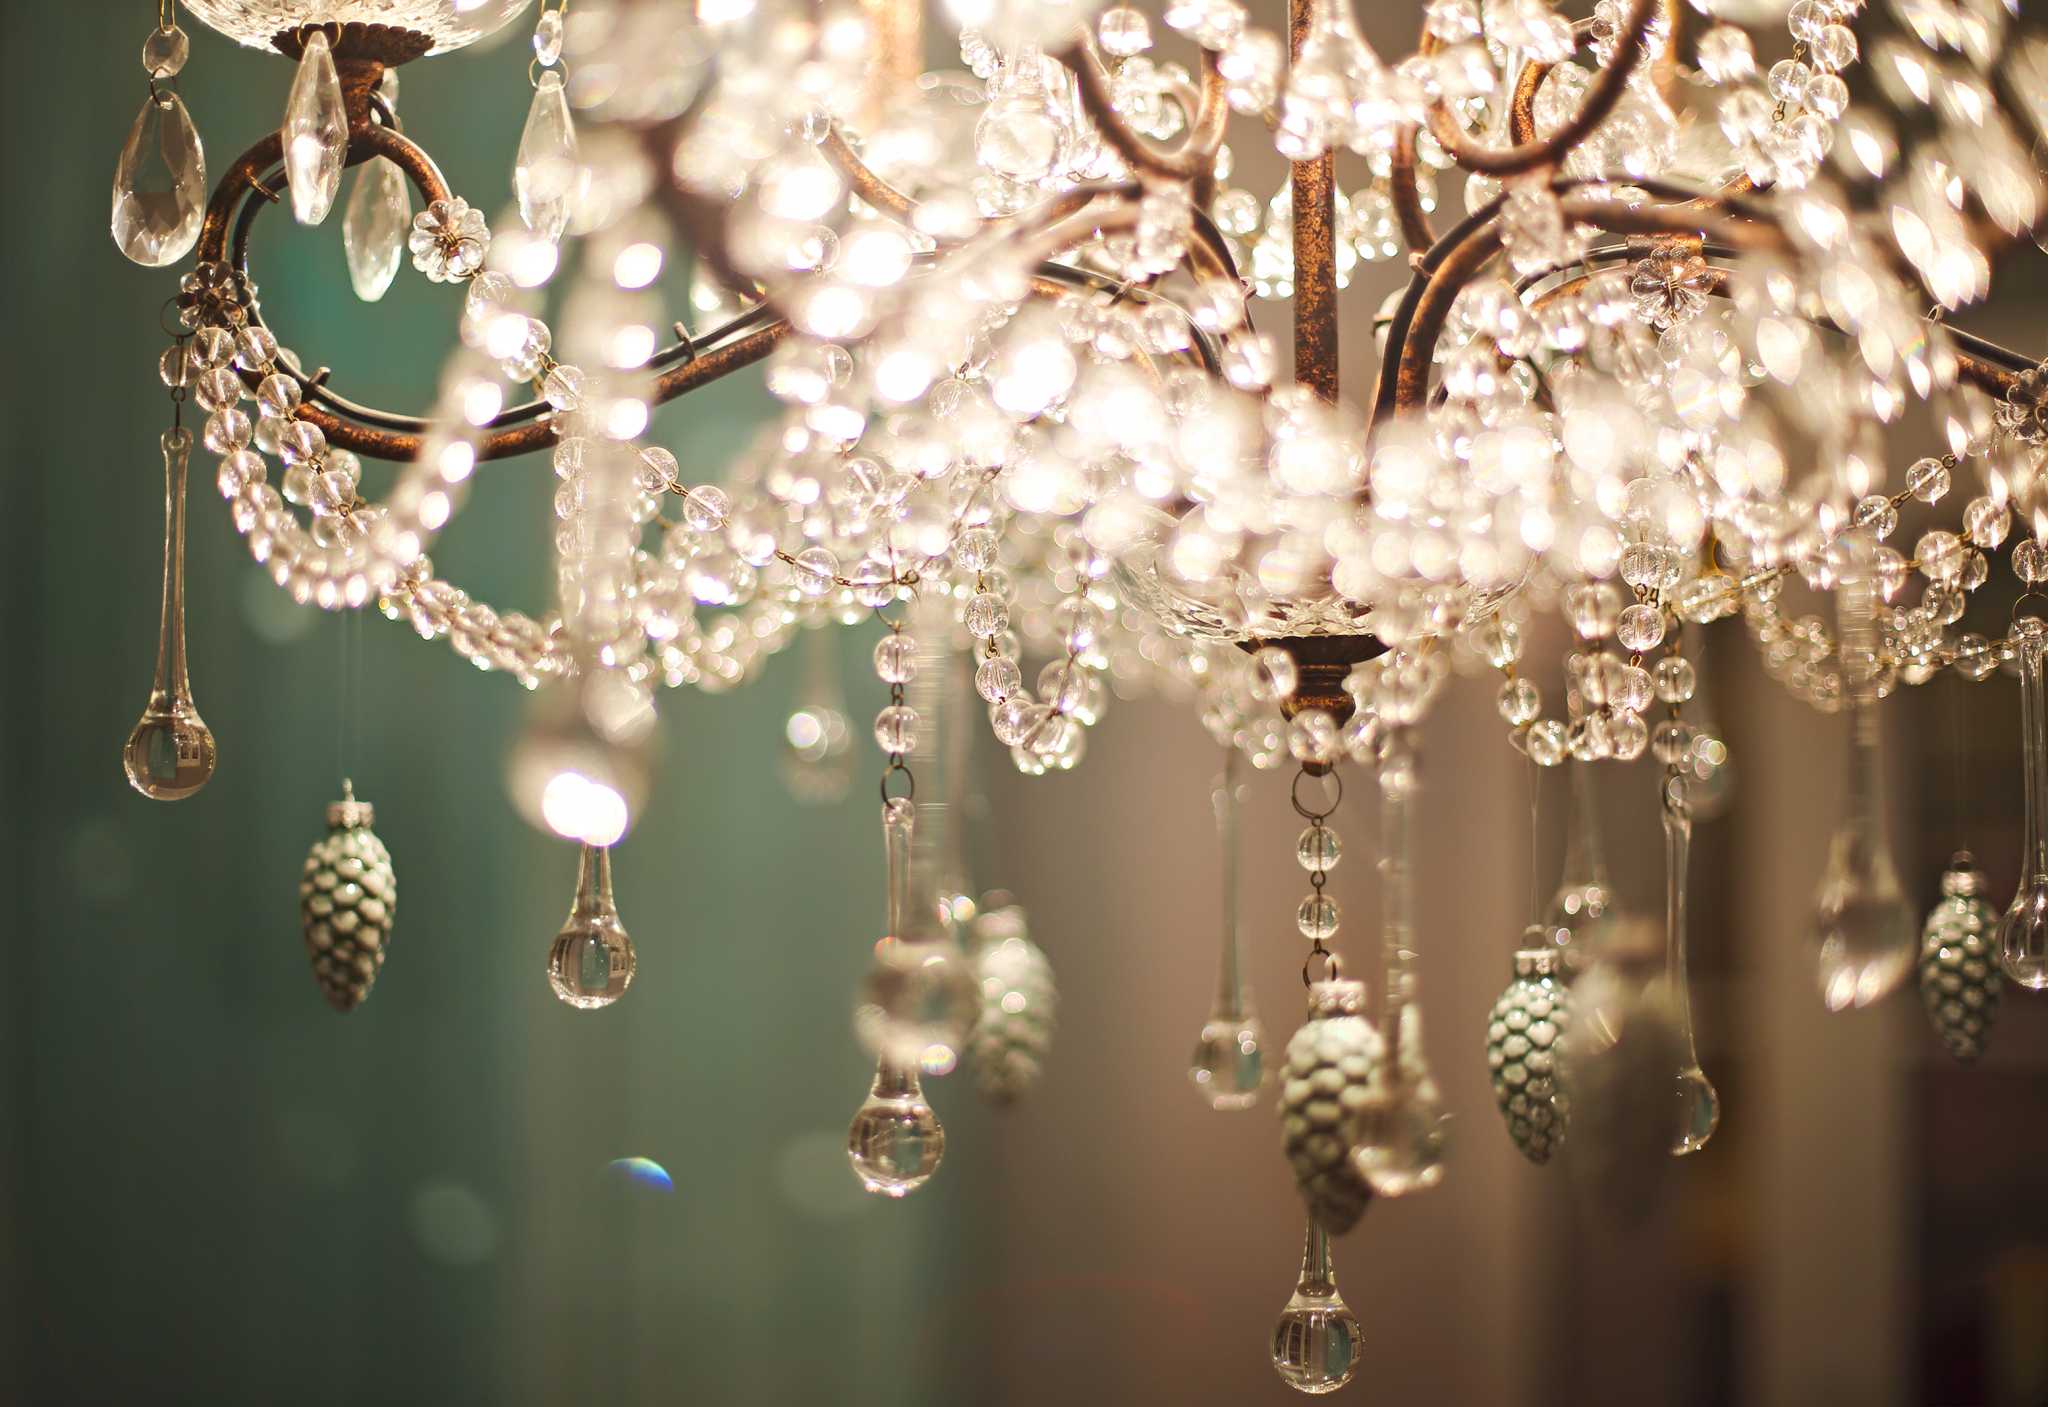 How To Take Off A Chandelier